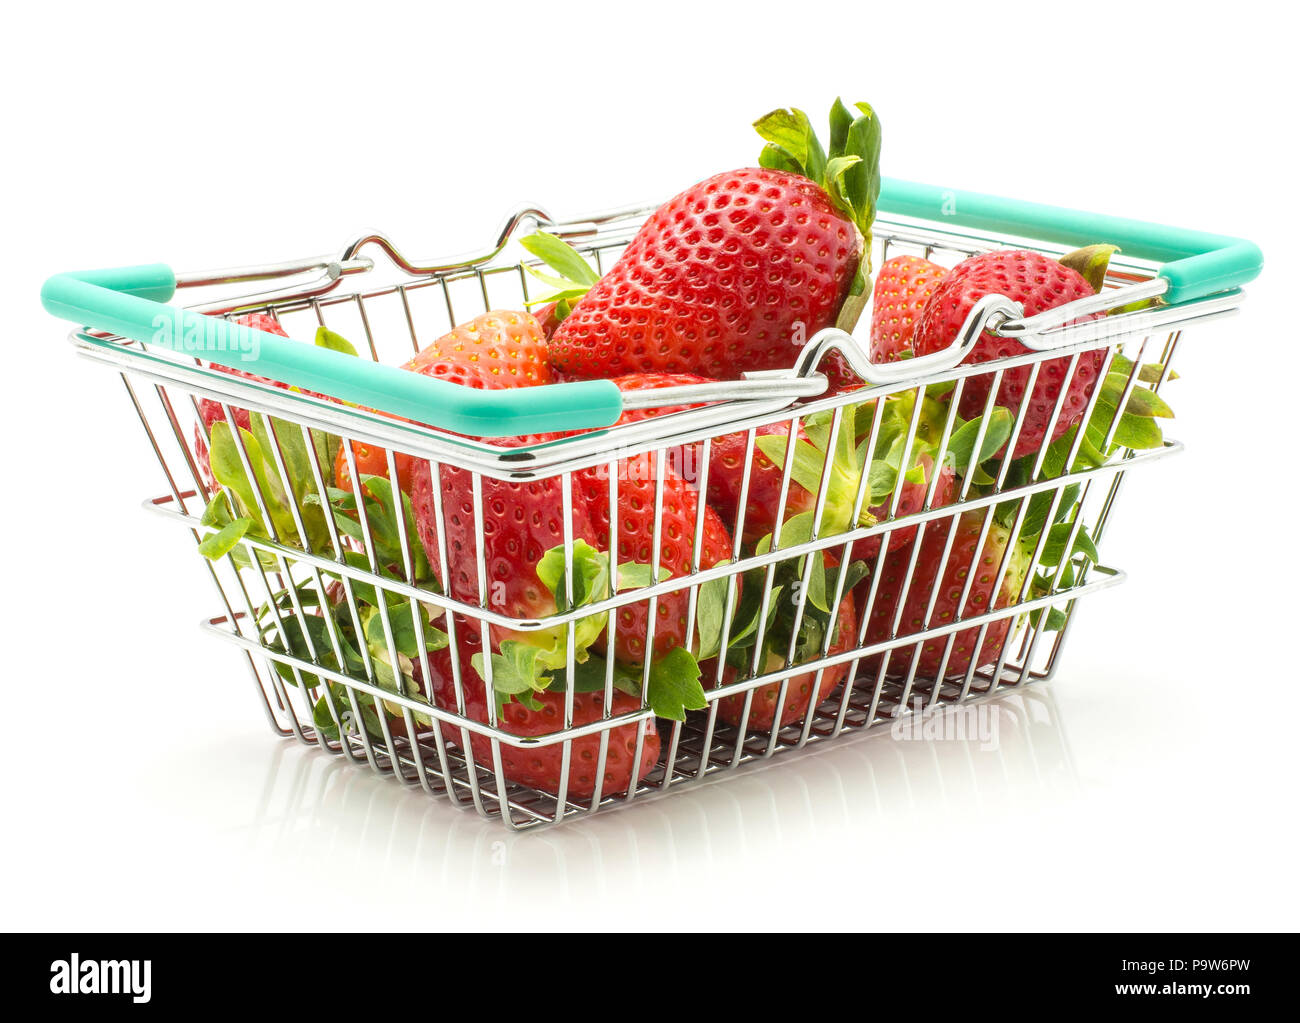 Strawberries in a shopping basket isolated on white background Stock Photo